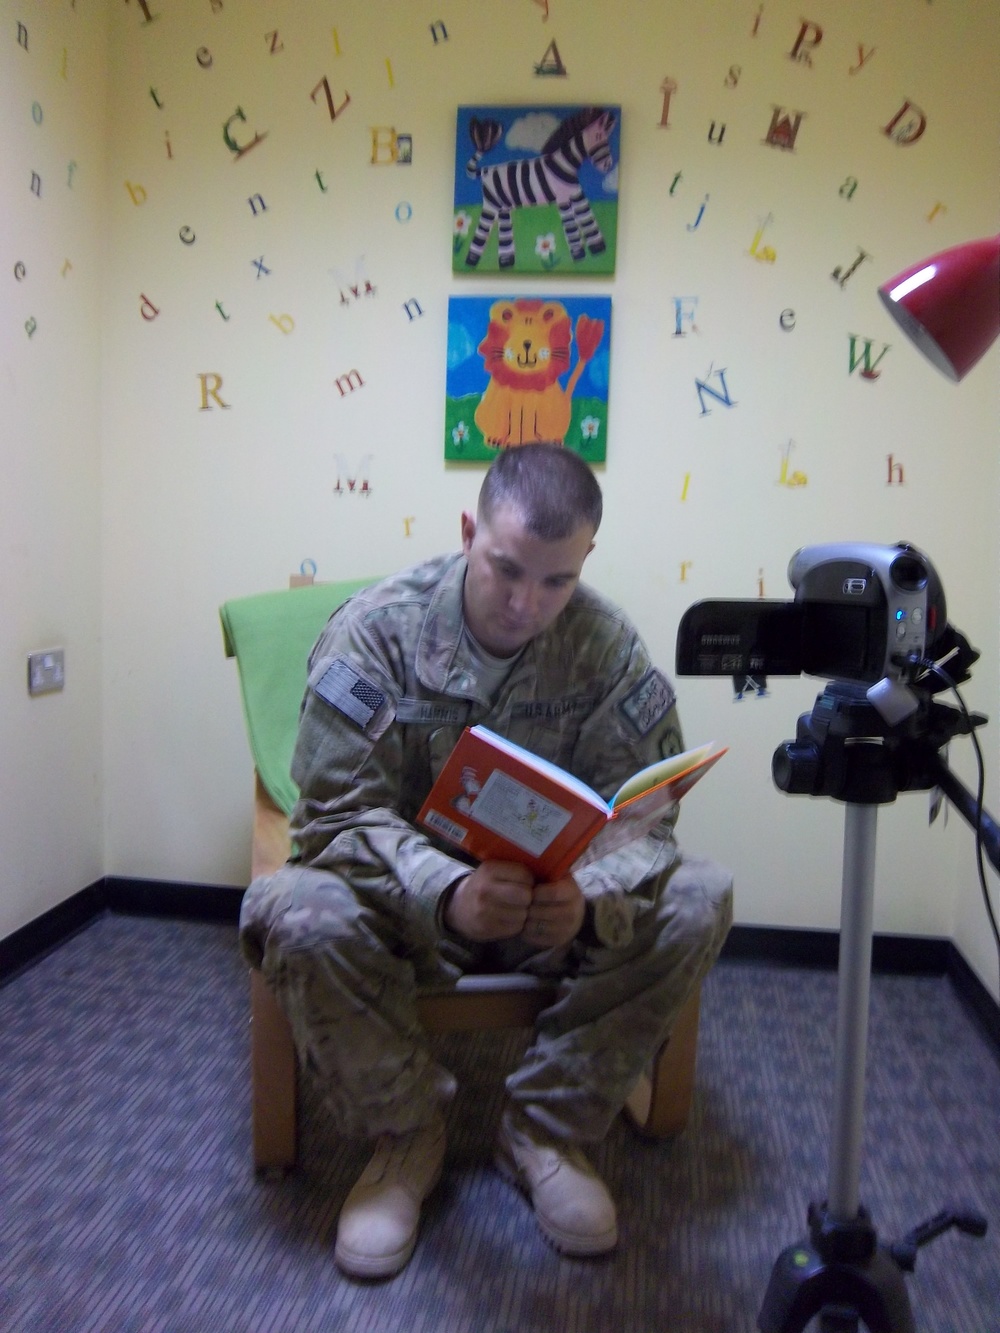 'United through Reading' helps bring families together in Afghanistan